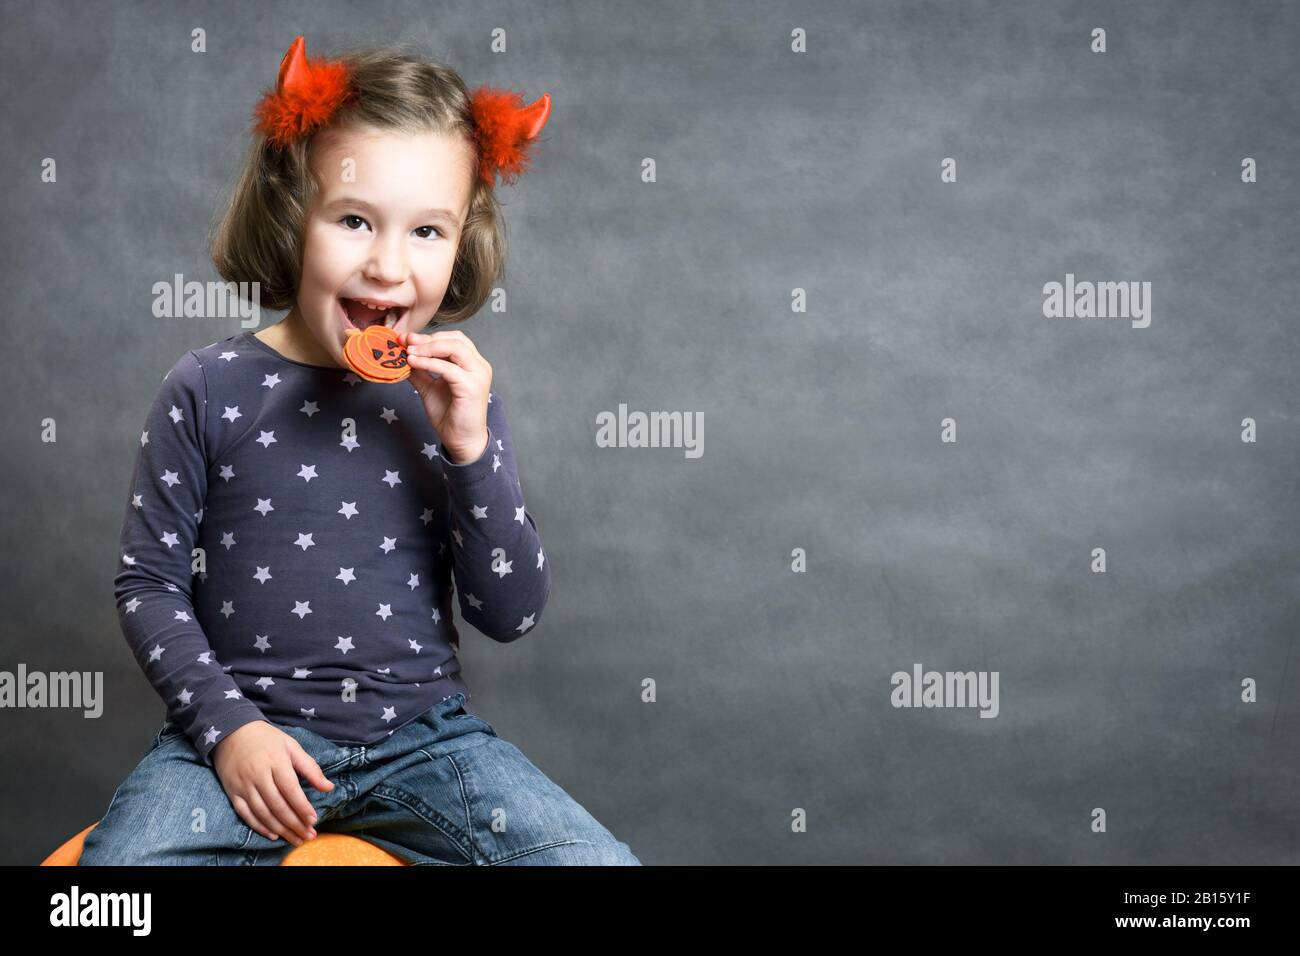 Halloween background with adorable child and space for your text. Little girl with costume horns having fun. Cute toddler smiles and eats Halloween tr Stock Photo